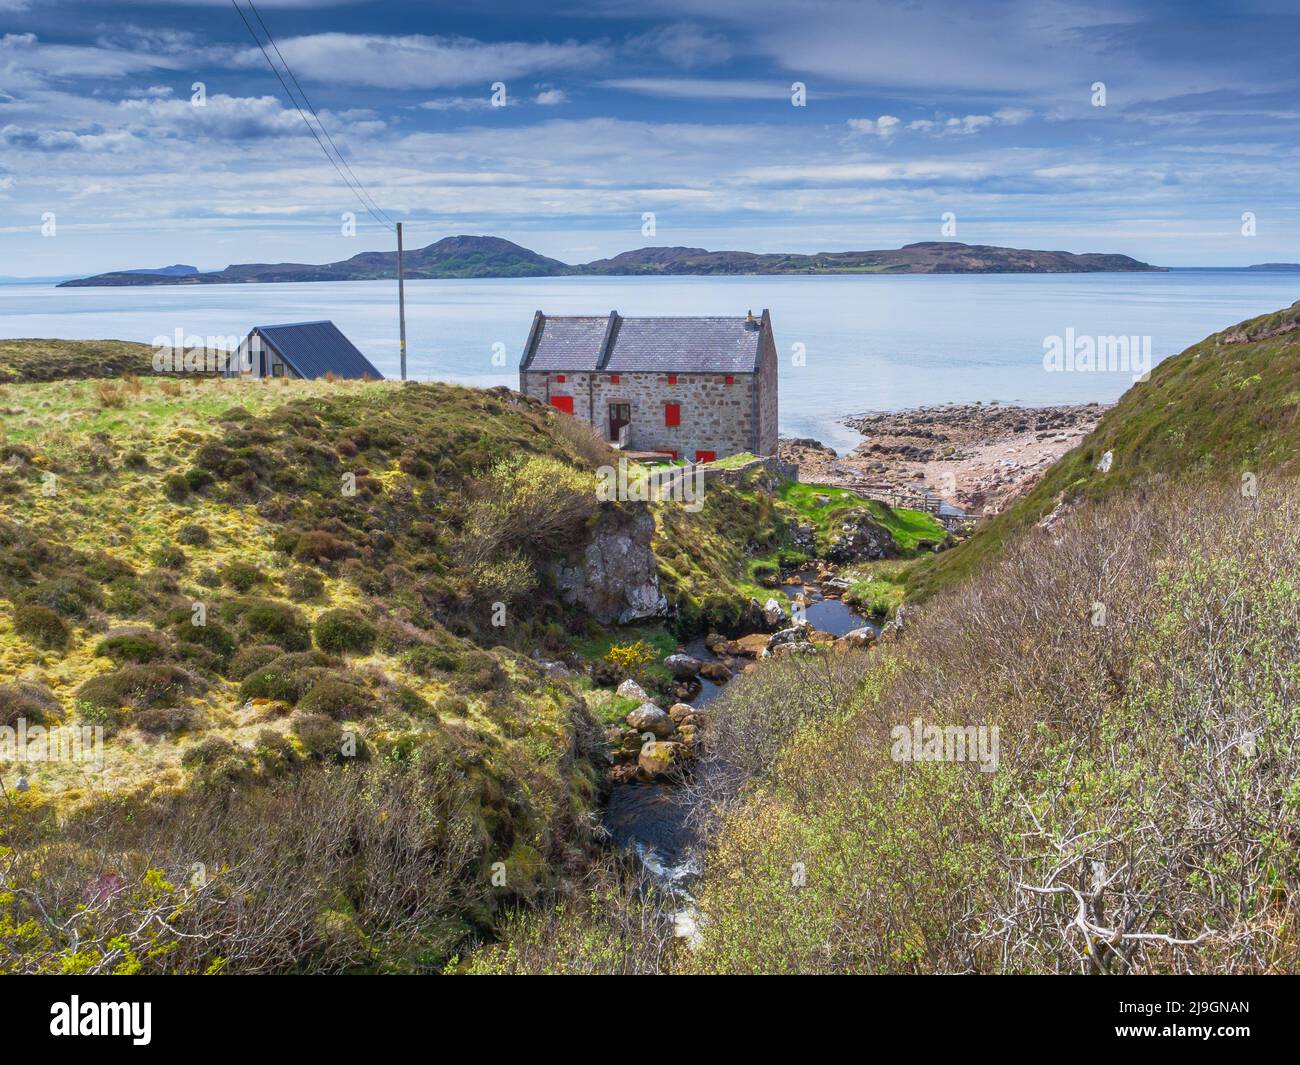 A stone house in Achiltibuie village in Ross and Cromarty, Highland, Scotland Stock Photo